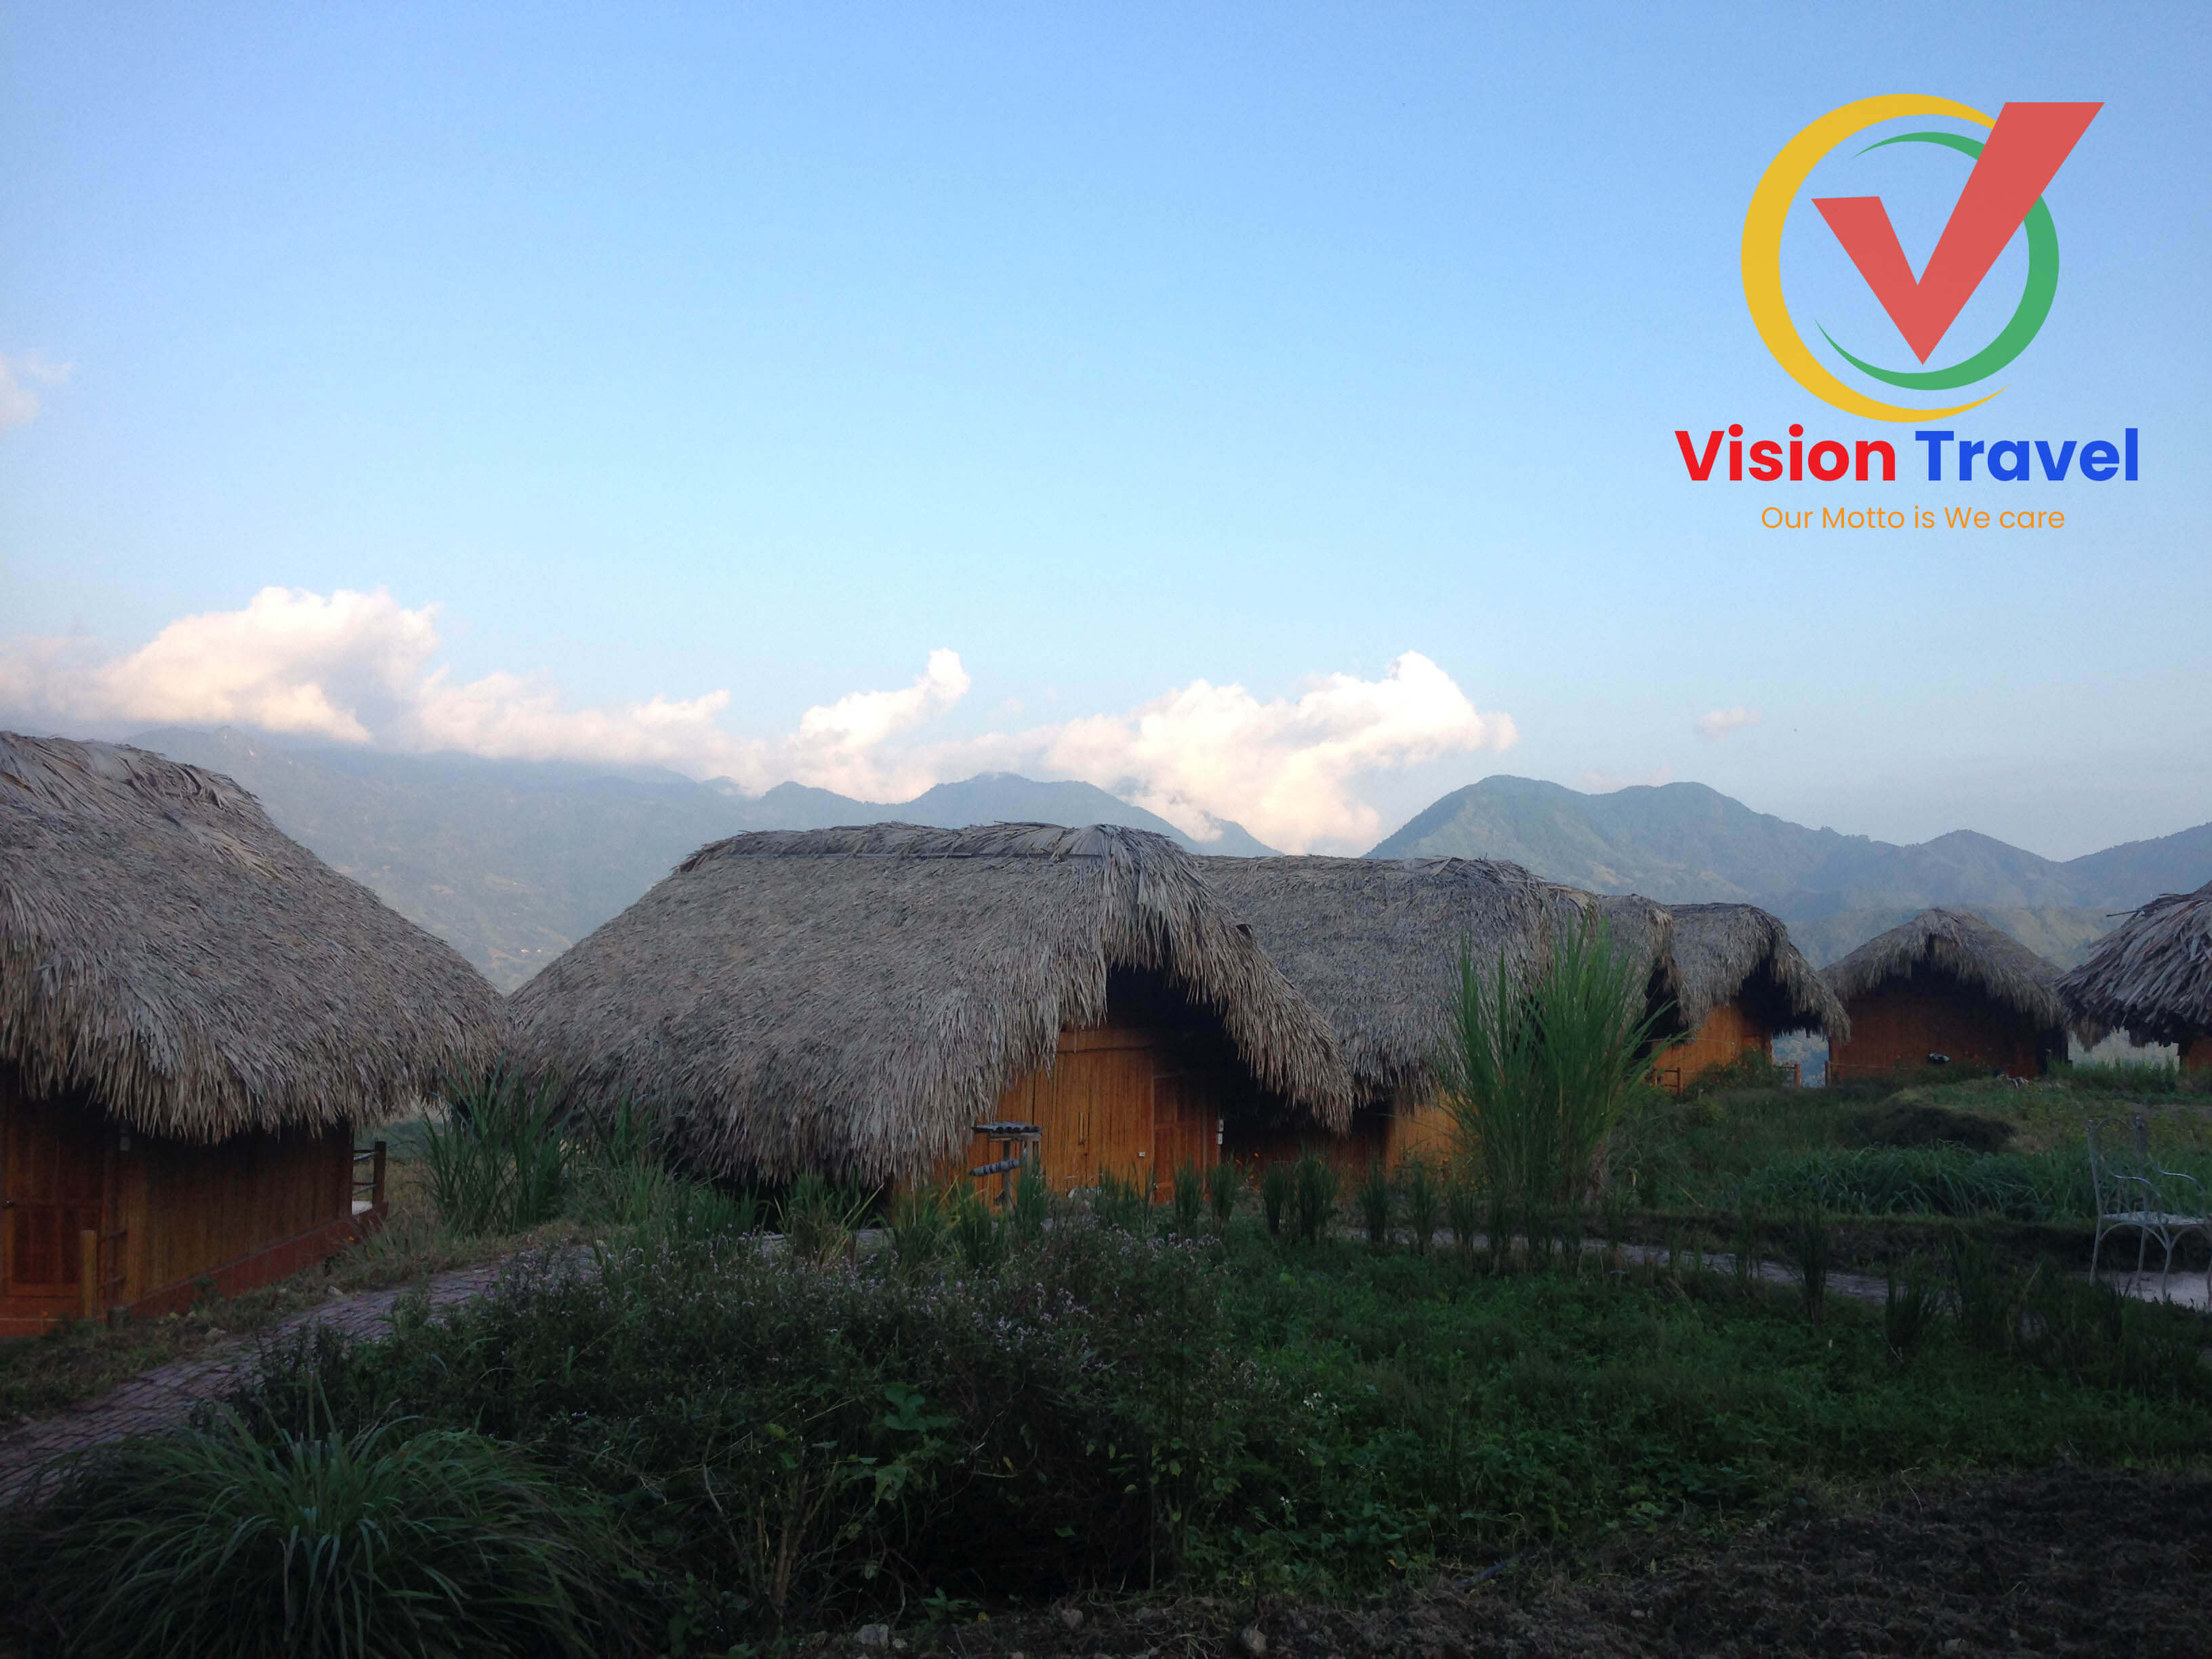 Hanoi – Thong Nguyen village7-day by vehicle Ha Giang – Cao Bang, Northern Vietnam Adventure (Home stay, Trekking, Market)